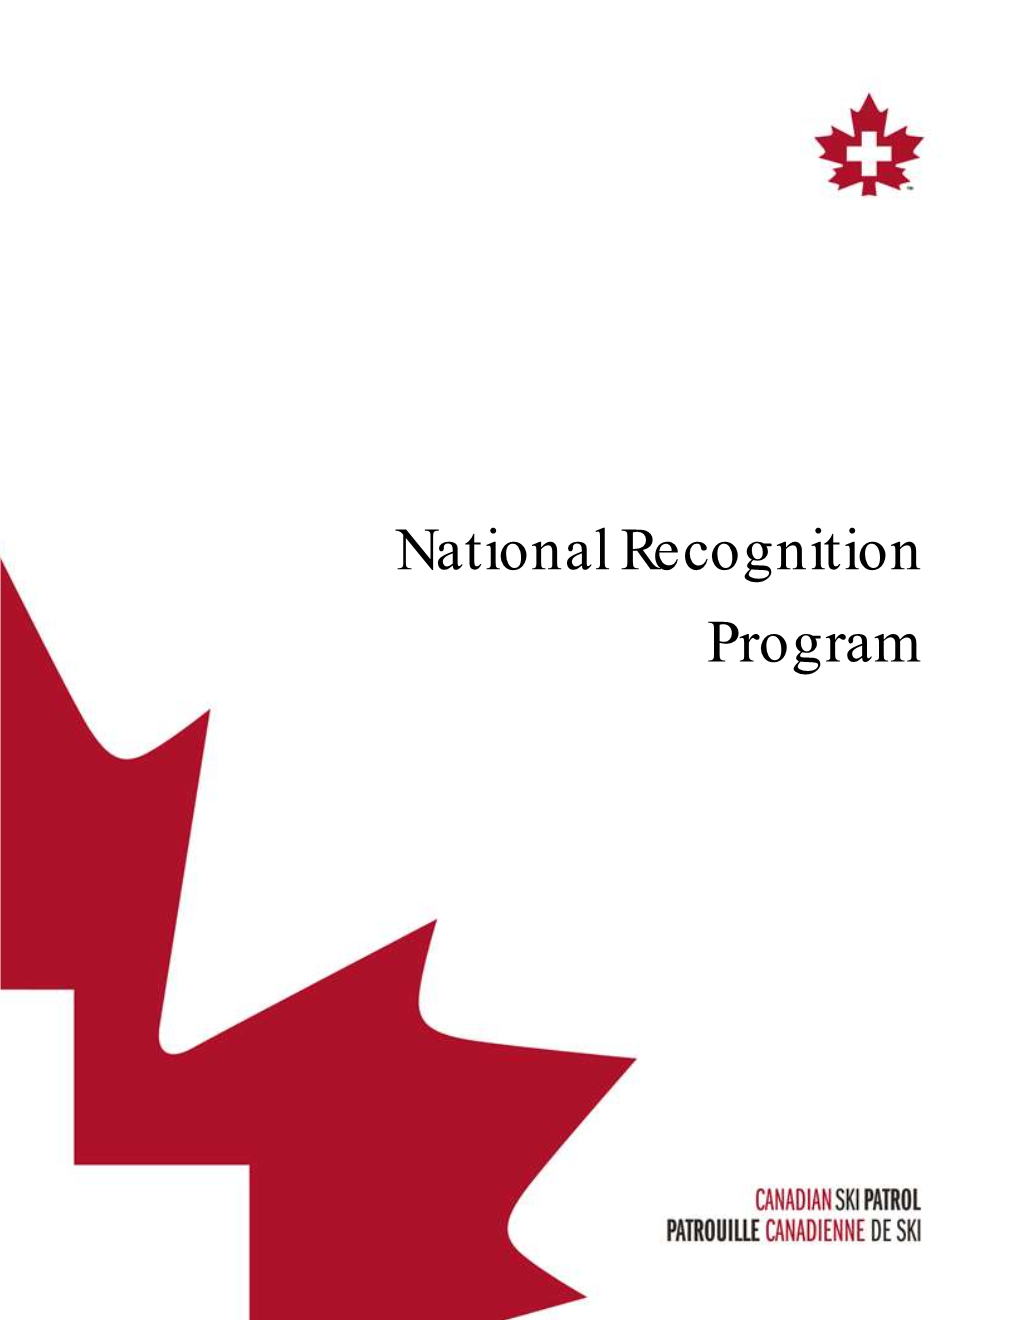 National Recognition Program Require Approval of the Board of Directors